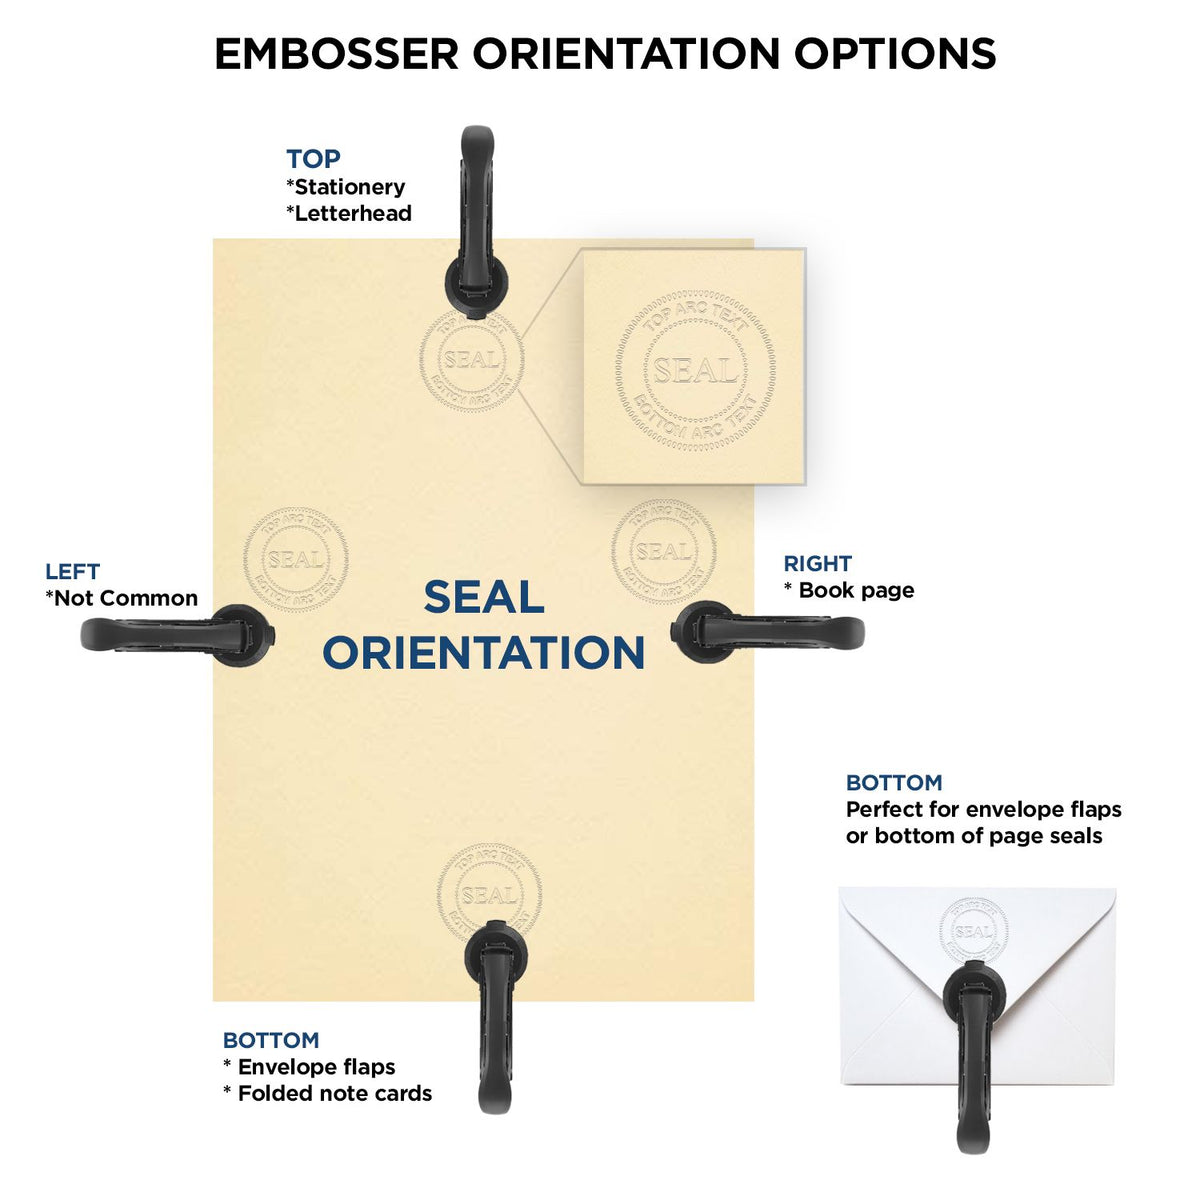 An infographic for the New York Geologist Desk Seal showing embosser orientation, this is showing examples of a top, bottom, right and left insert.